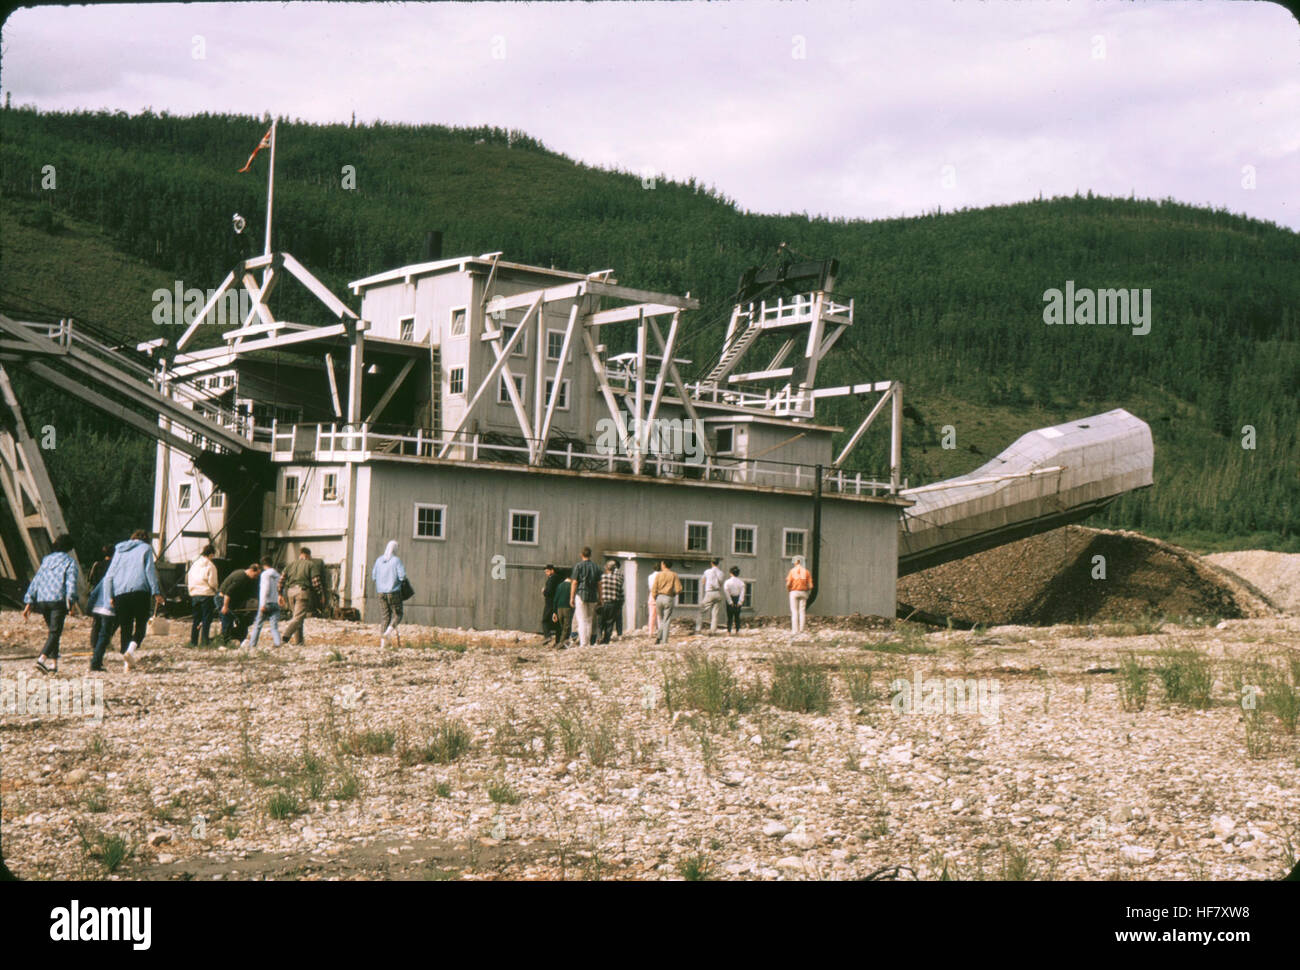 Floating Gold Dredge; Dawson City, Yukon Territory, Canada.  Dredge scoops up river rock and gravels, separating gold from the rest of the material and depositing the rock aside into tailing piles. Stock Photo